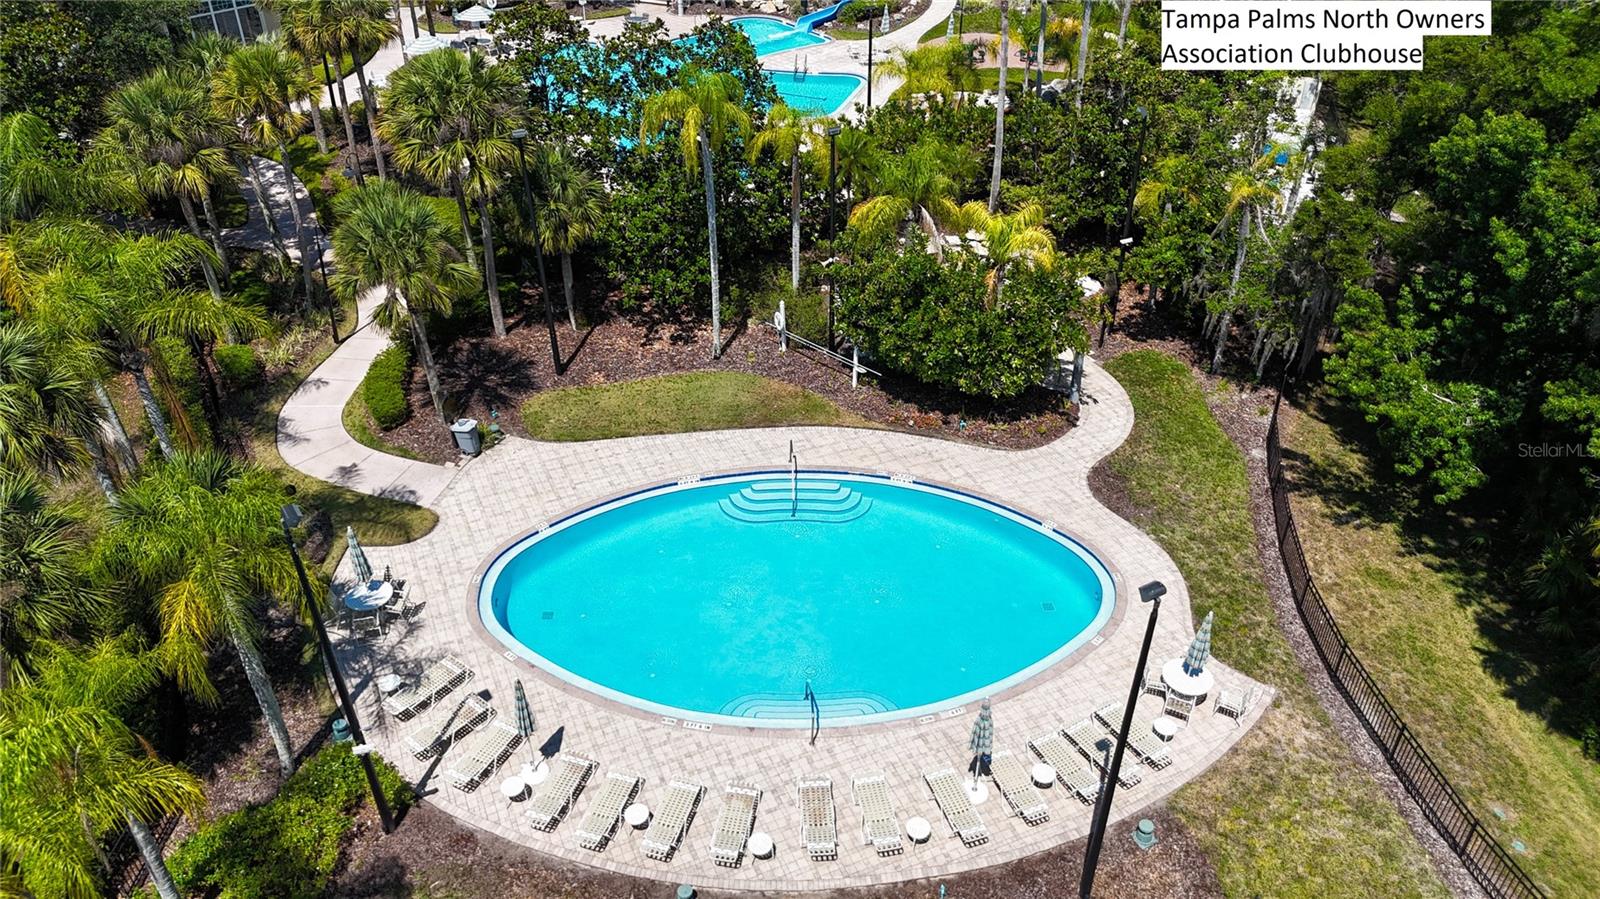 Tampa Palms North Owners Association Clubhouse & Amenities